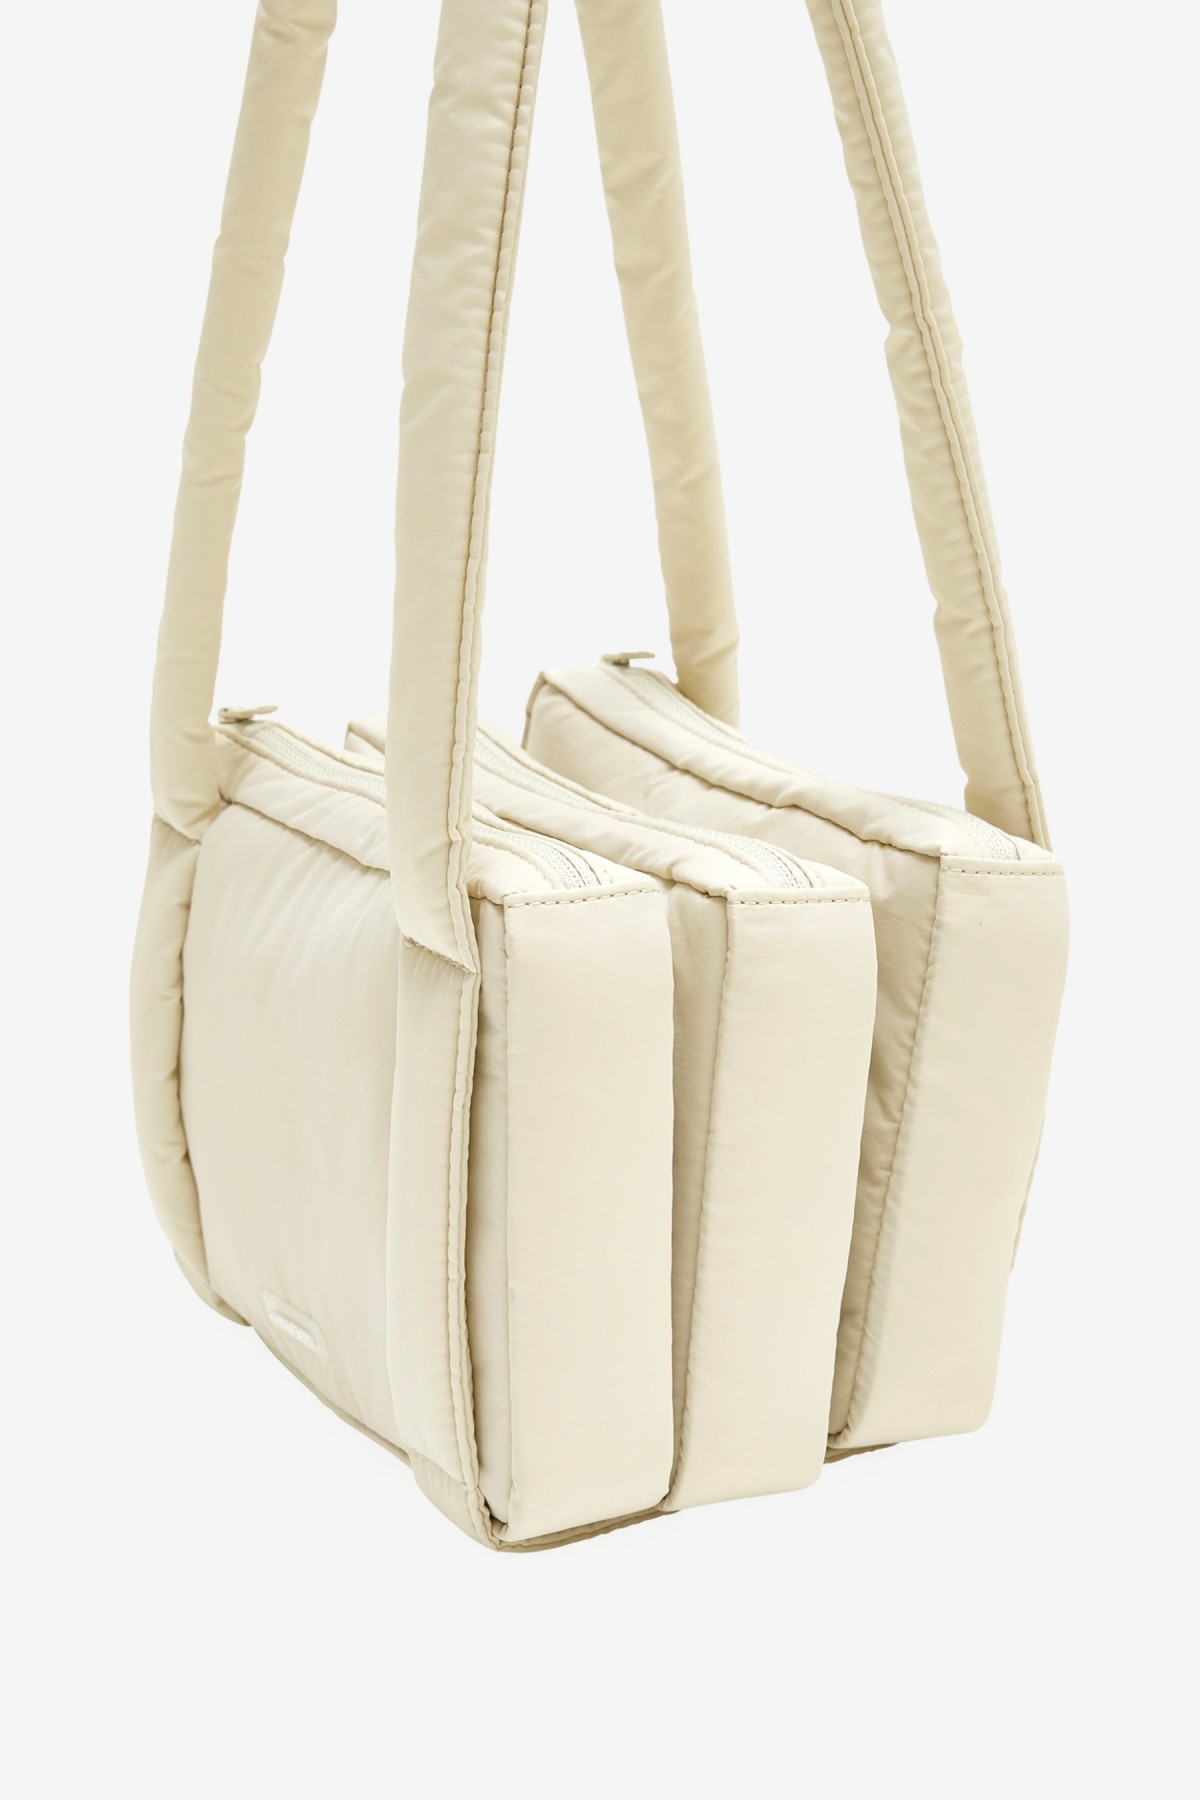 Amomento Padded 3-Layer Bag in Light Beige